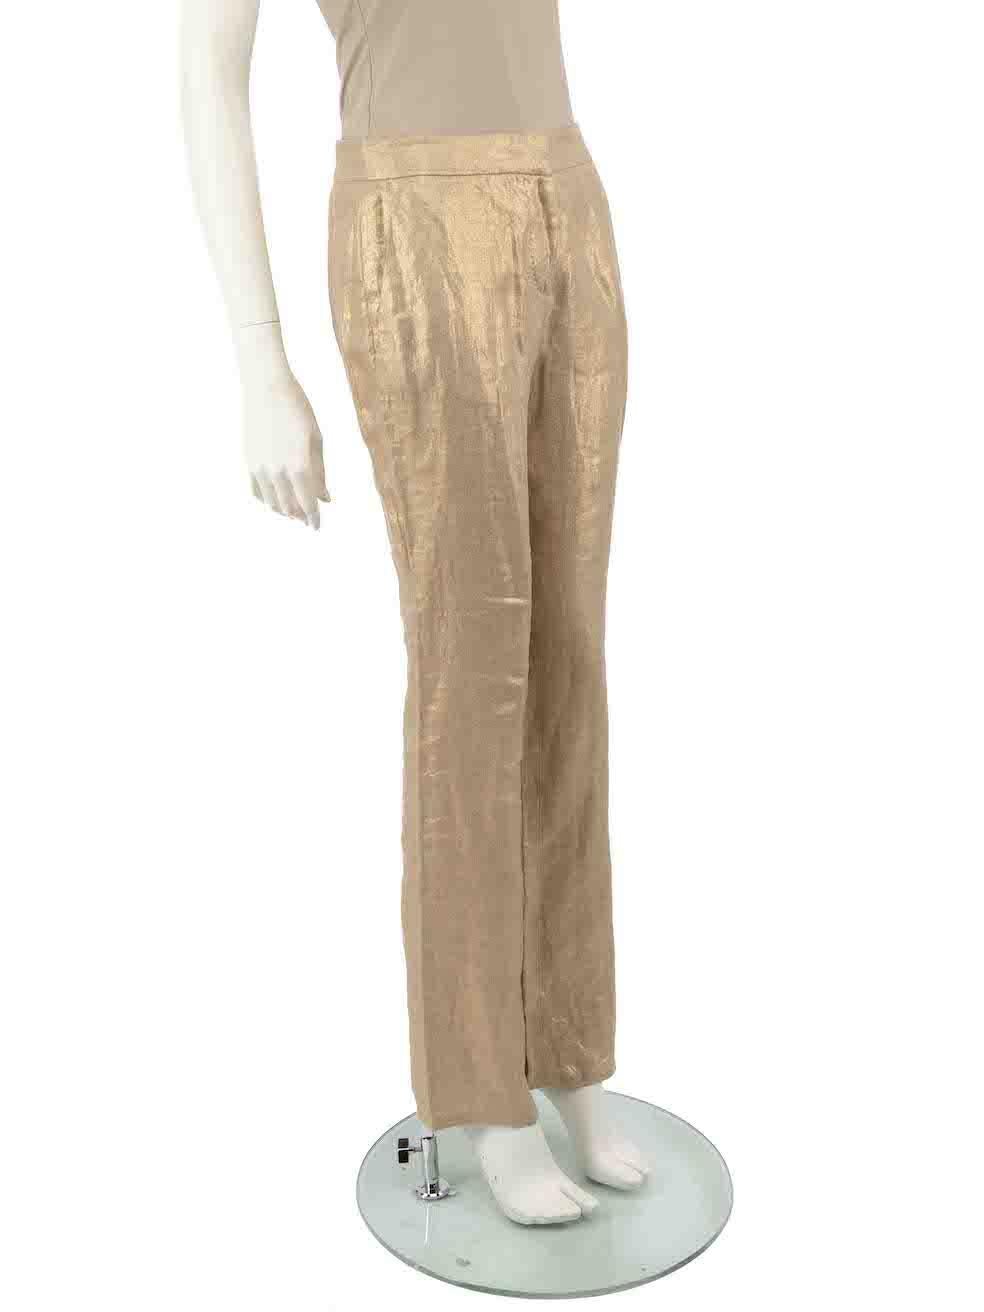 CONDITION is Very good. Hardly any visible wear to trousers is evident on this used Alexander McQueen designer resale item.
 
 
 
 Details
 
 
 Gold
 
 Linen
 
 Trousers
 
 Straight fit
 
 Mid rise
 
 2x Side pockets
 
 Fly zip, hook and button